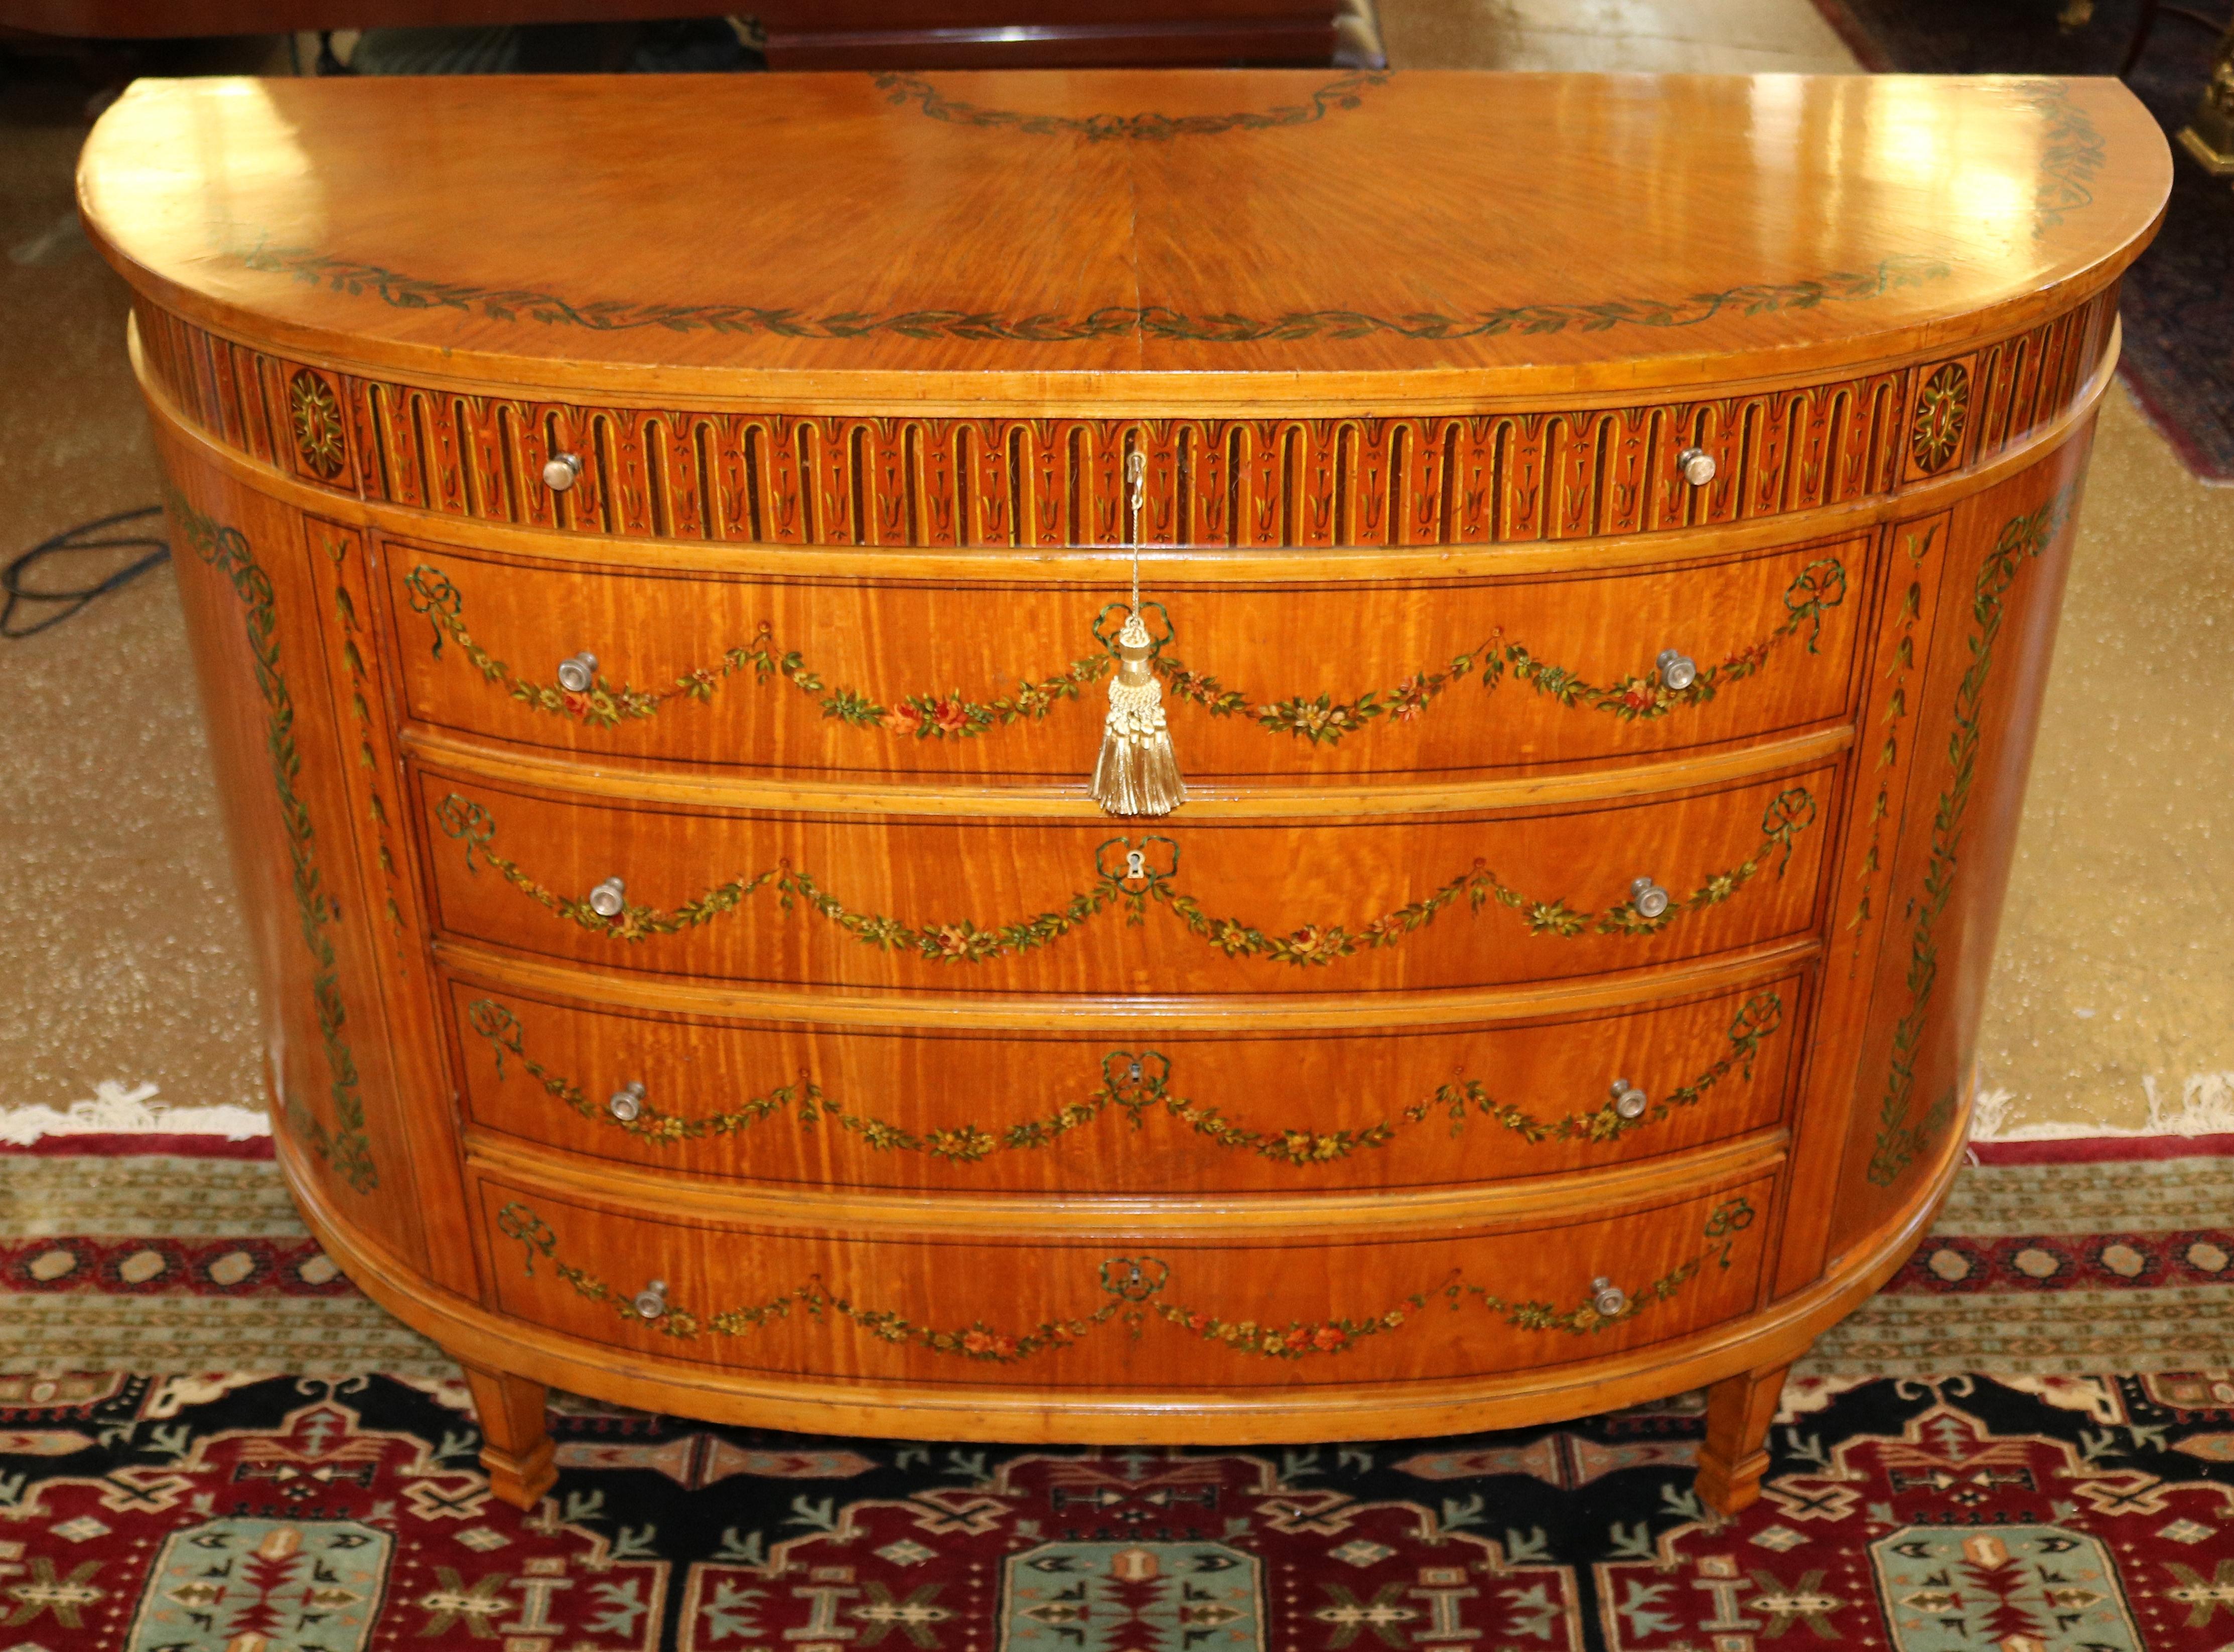 F.O Schmidt Vienna Adams Style Satinwood Paint Decorated Dresser Commode 1910

Dimensions : 57